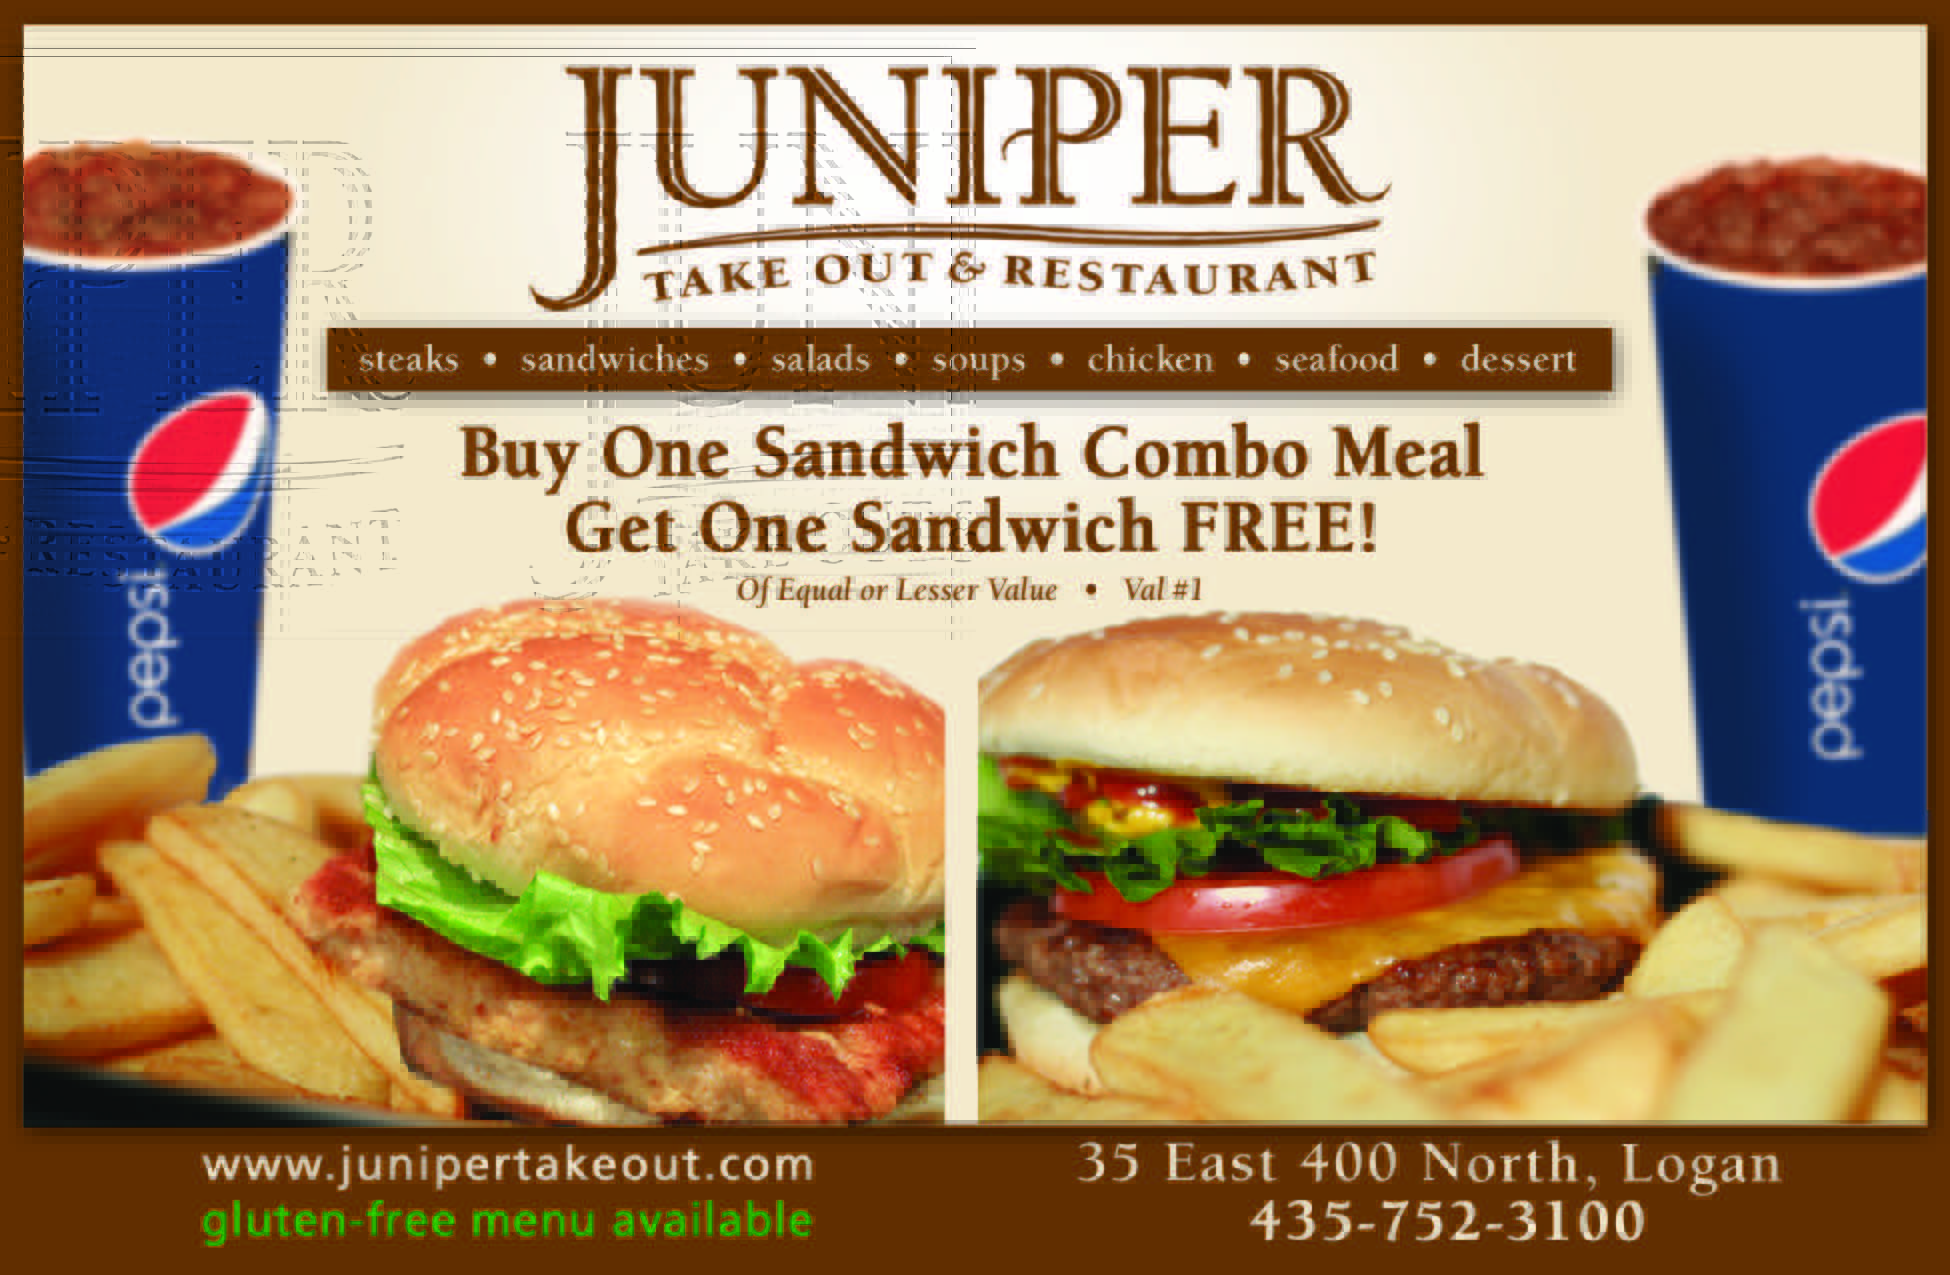 Juniper Take Out - Cache Valley Savings Guide